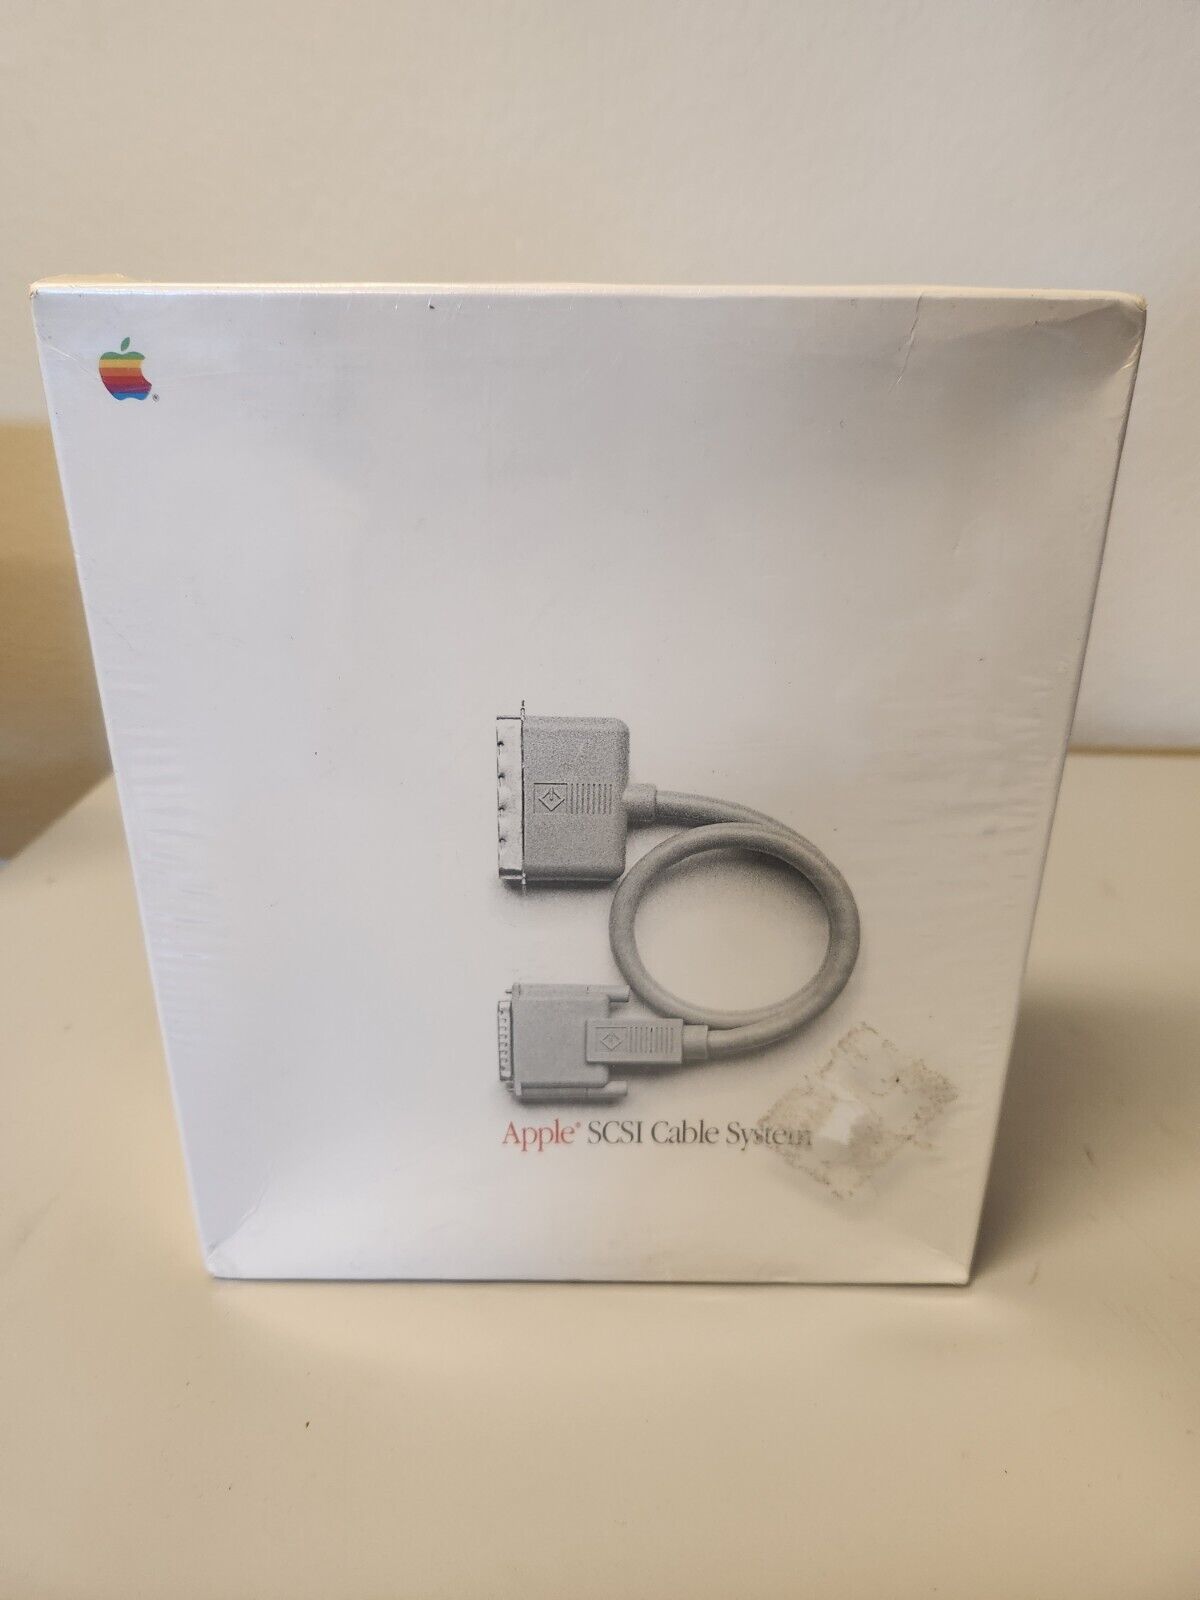 Brand New OEM Apple SCSI Cable System M0206 *Sealed*